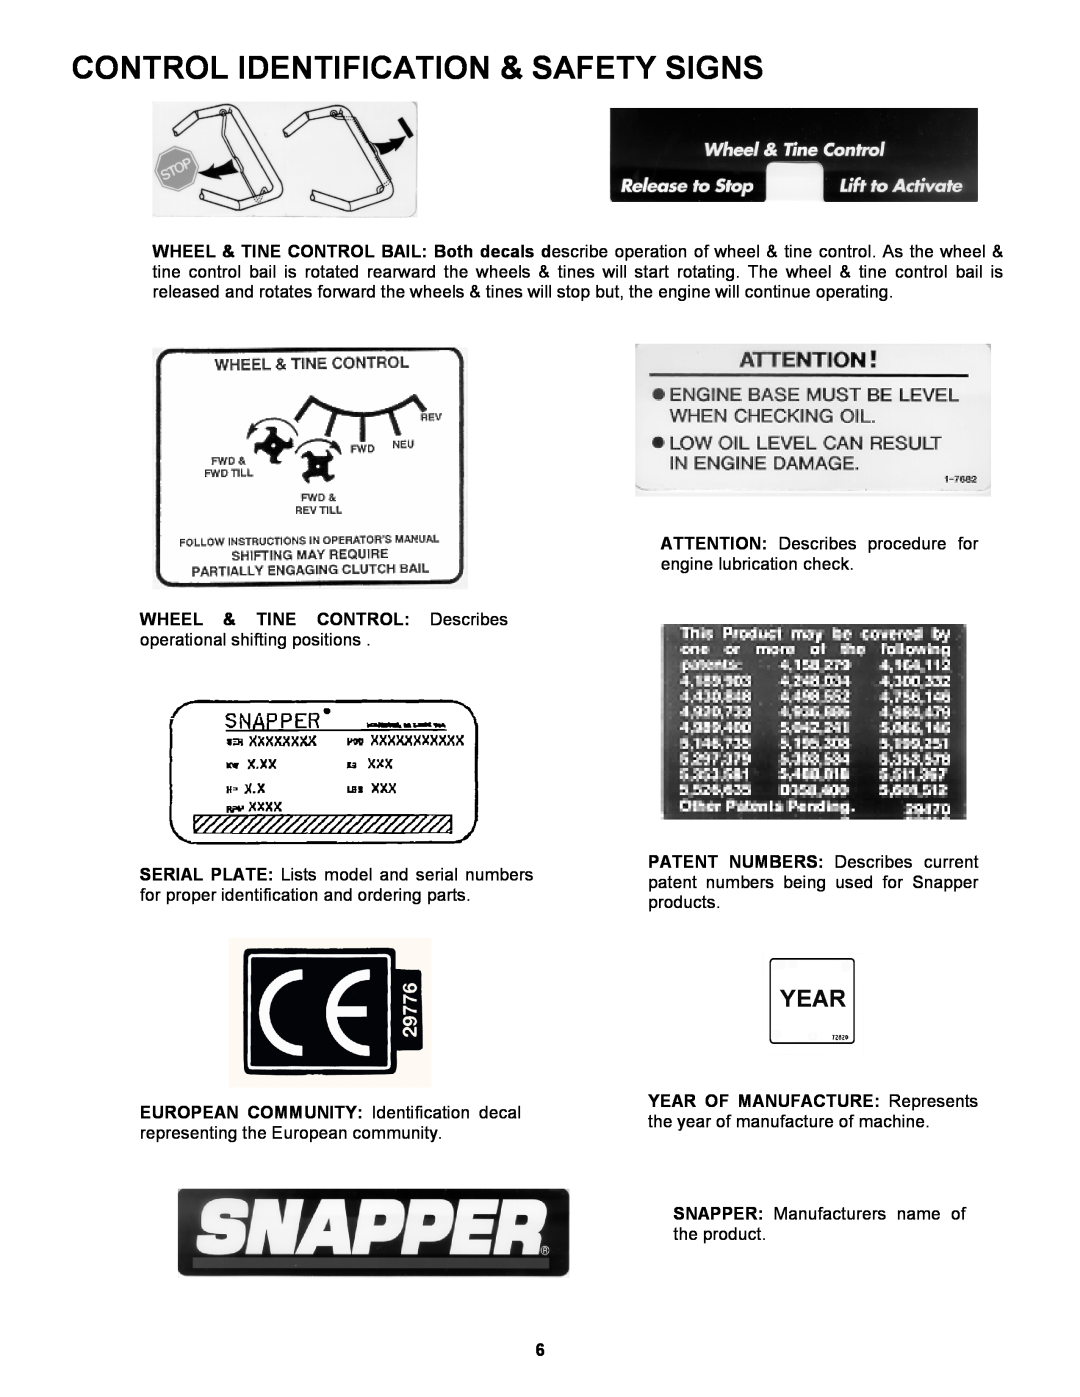 Snapper EICFR5505BV Control Identification & Safety Signs, WHEEL & TINE CONTROL Describes operational shifting positions 